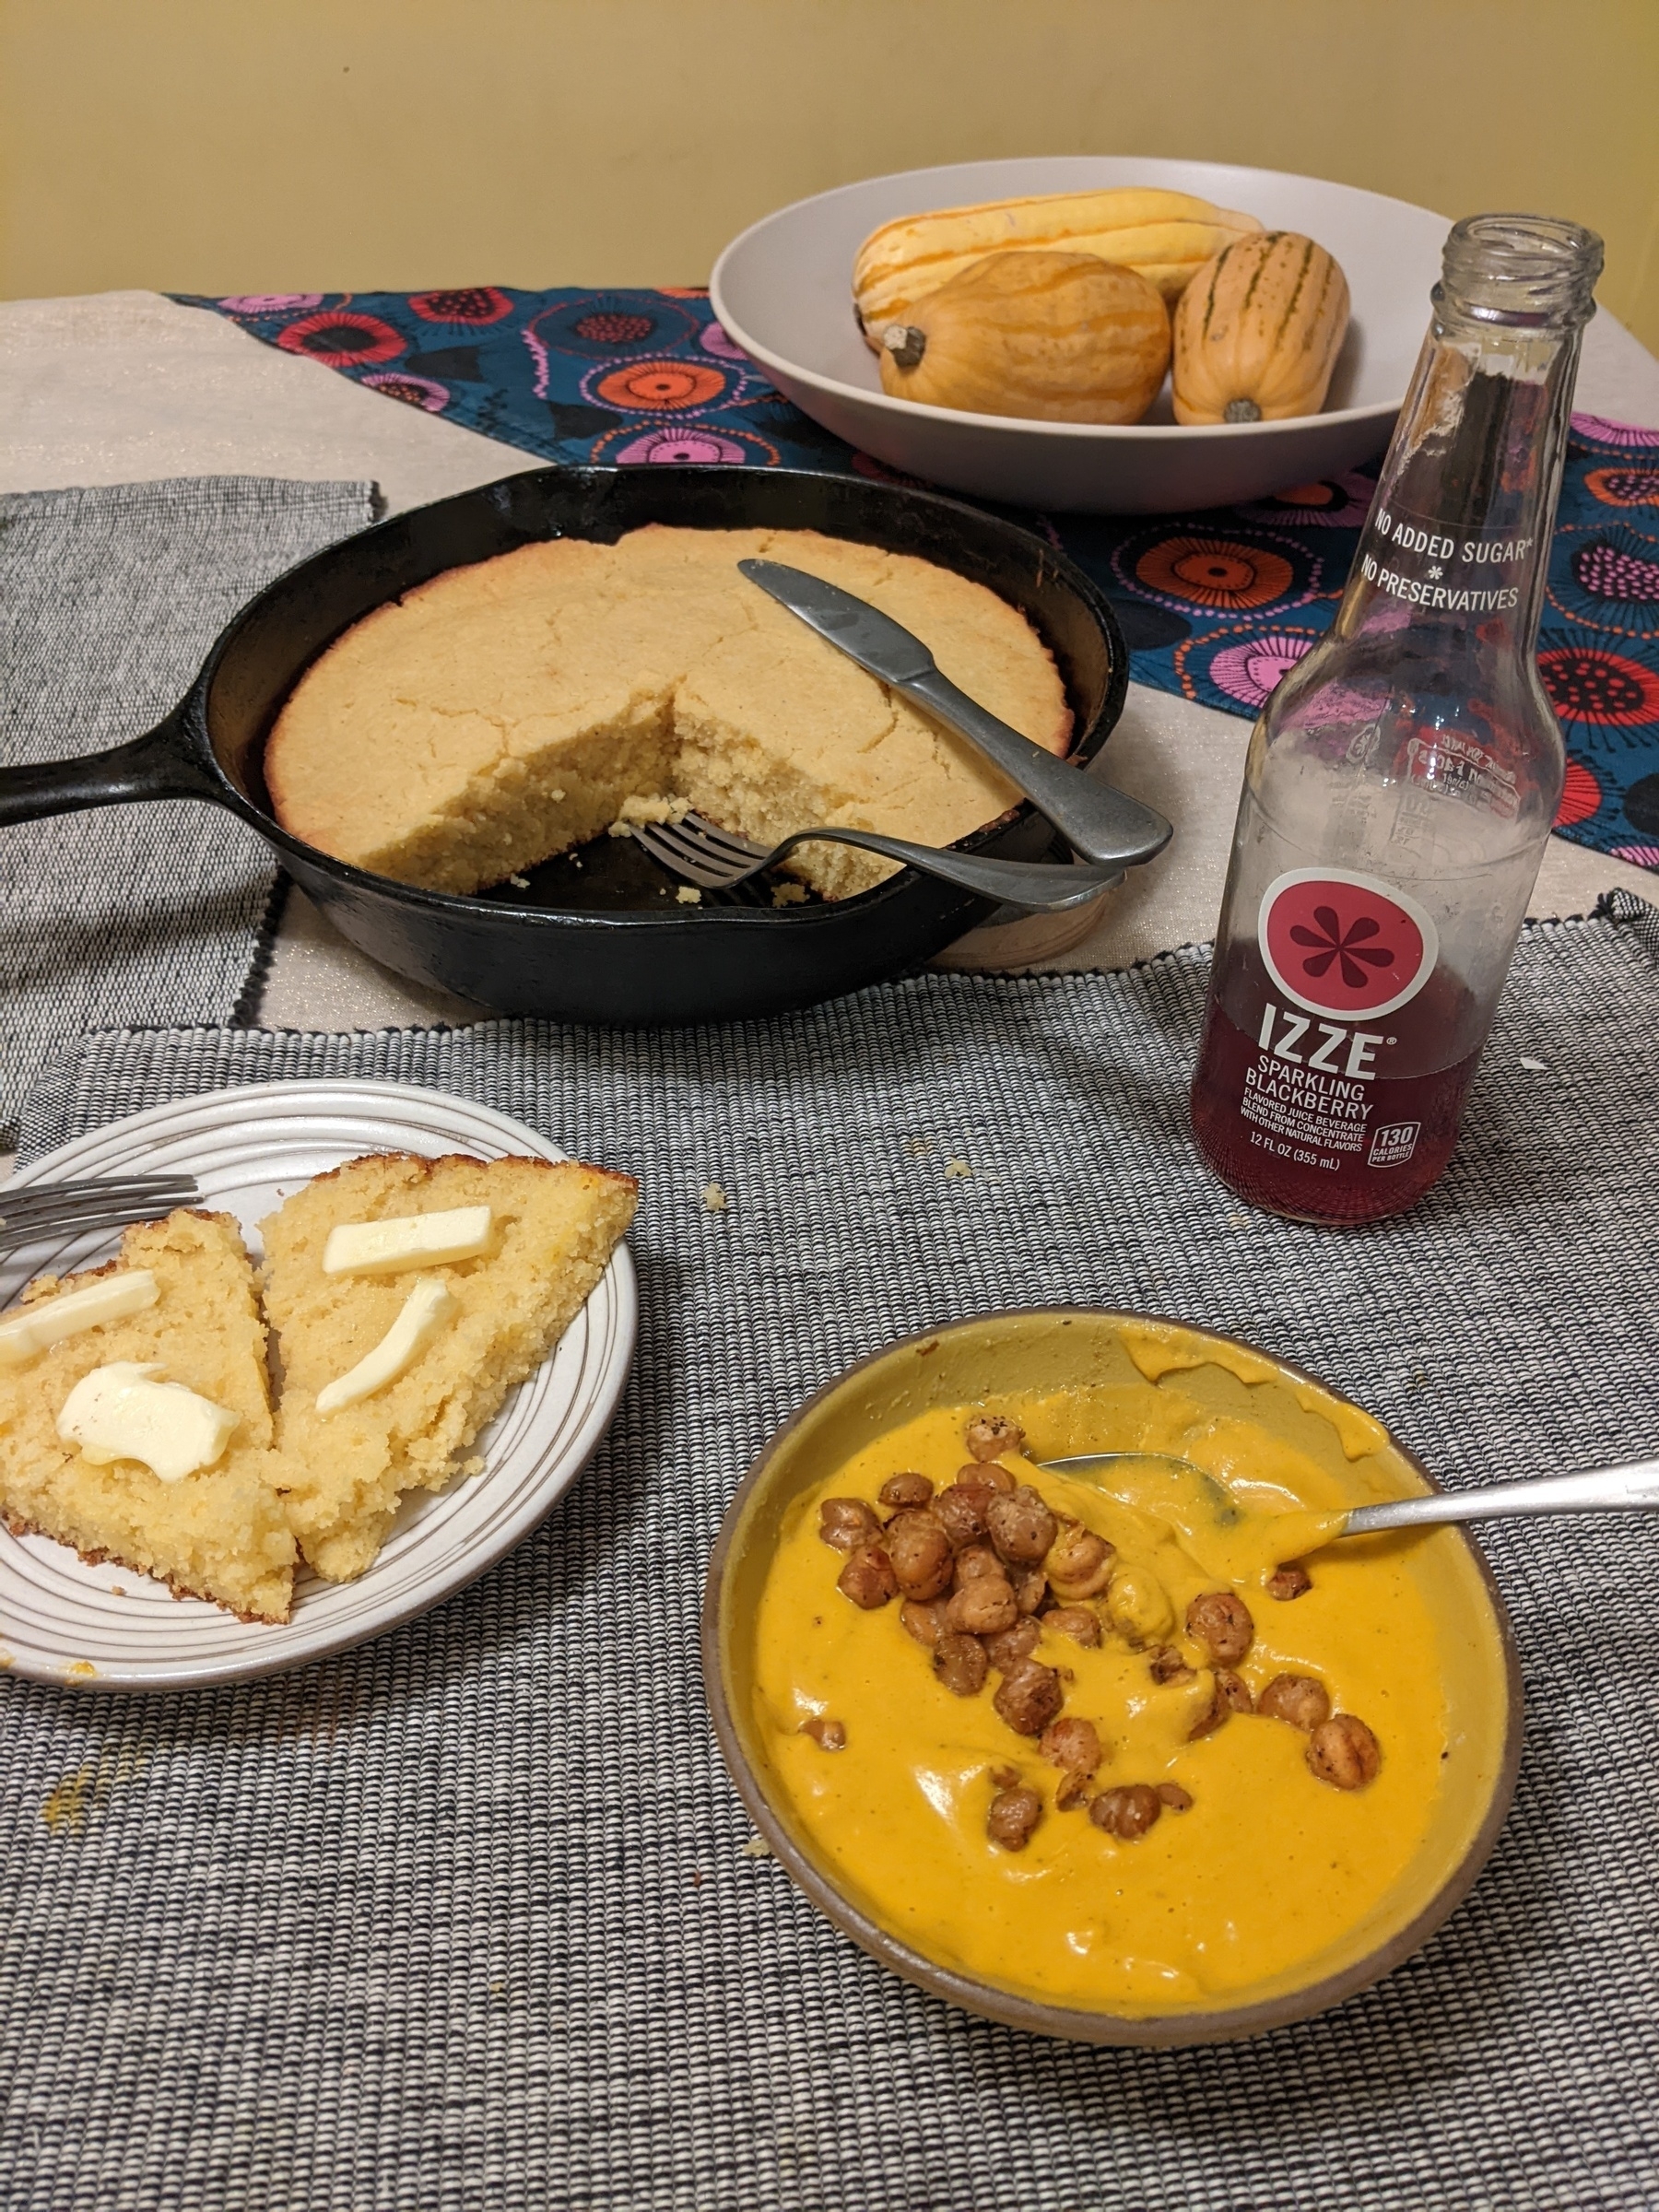 Squash soup topped with crispy chickpeas, split slice of cornbread with butter, Izze blackberry drink and a cast iron skillet of cornbread 